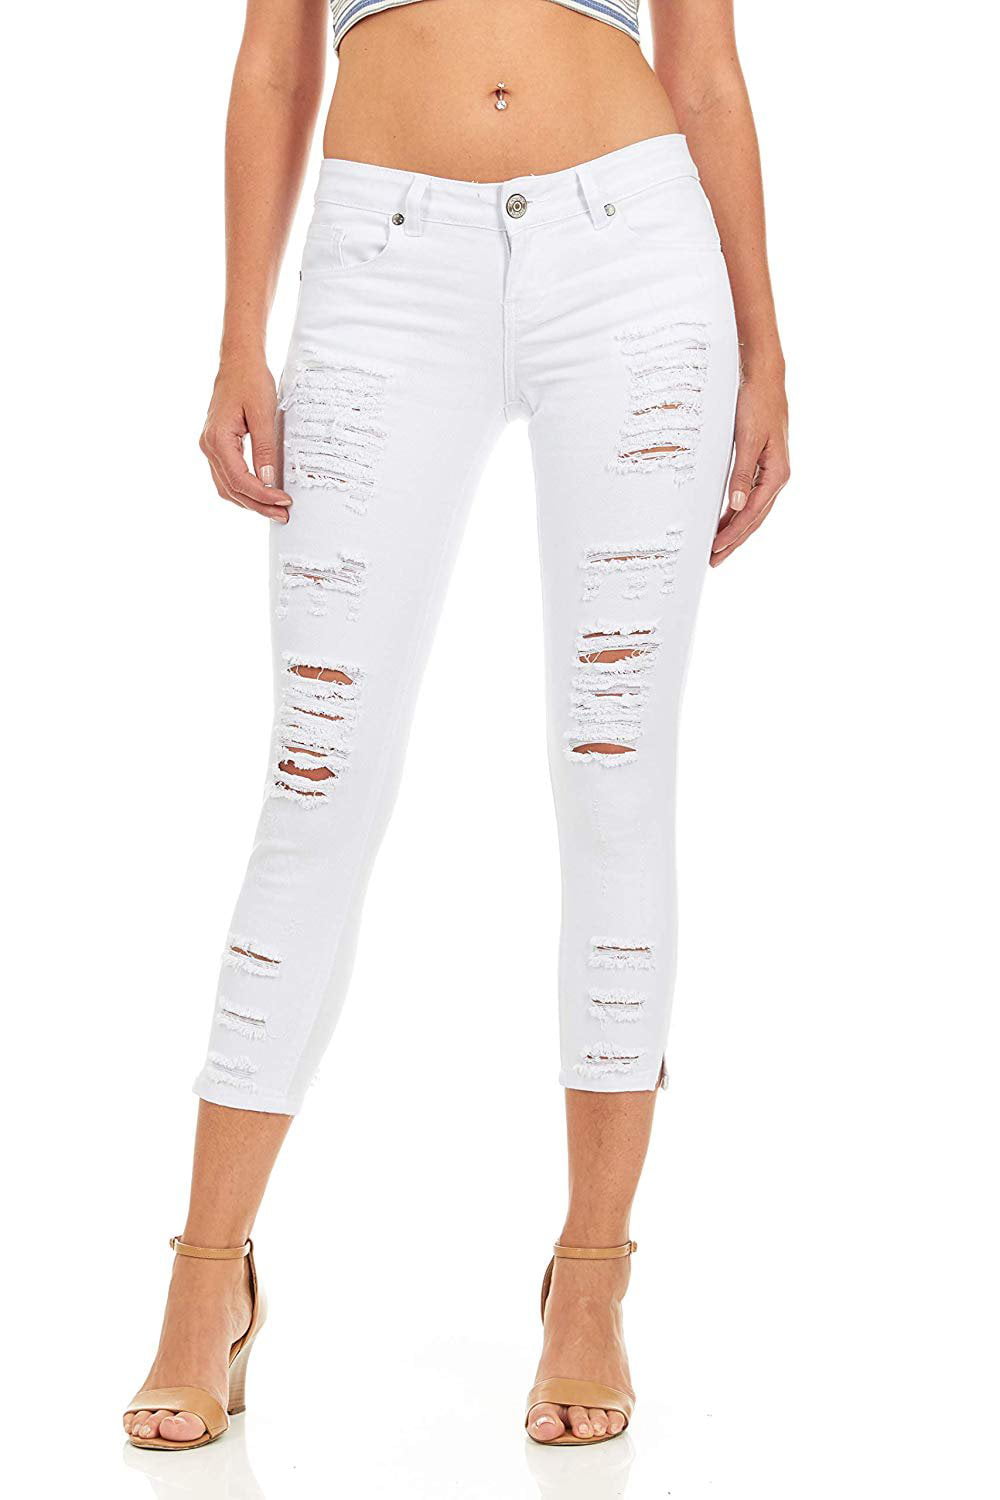 white ripped jeans women's plus size